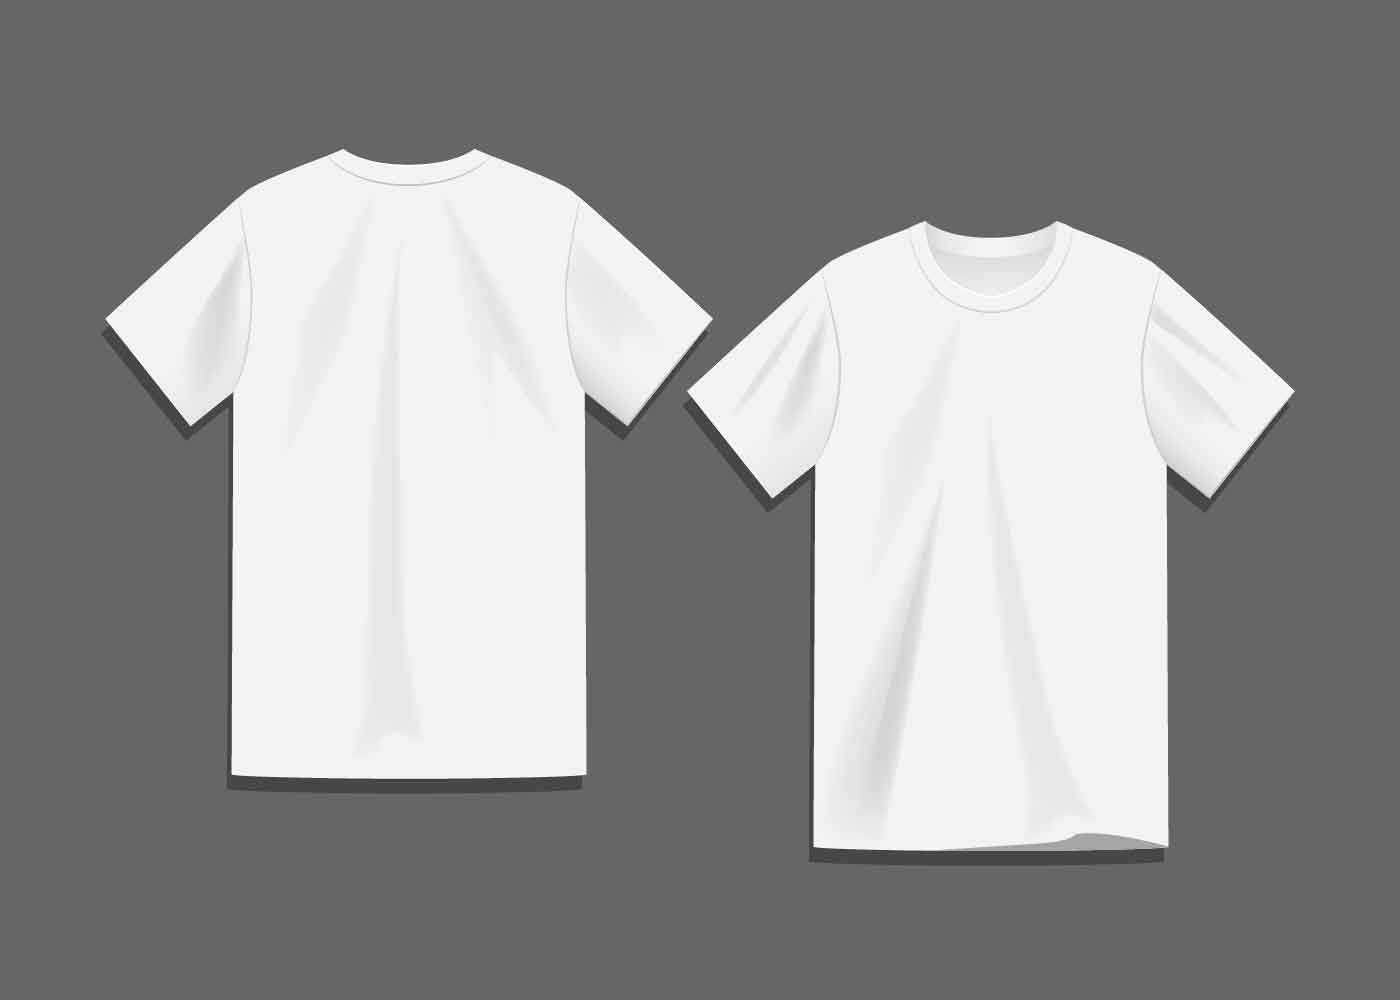 White Blank T Shirt Template Vector – Download Free Vectors Regarding Blank Tee Shirt Template